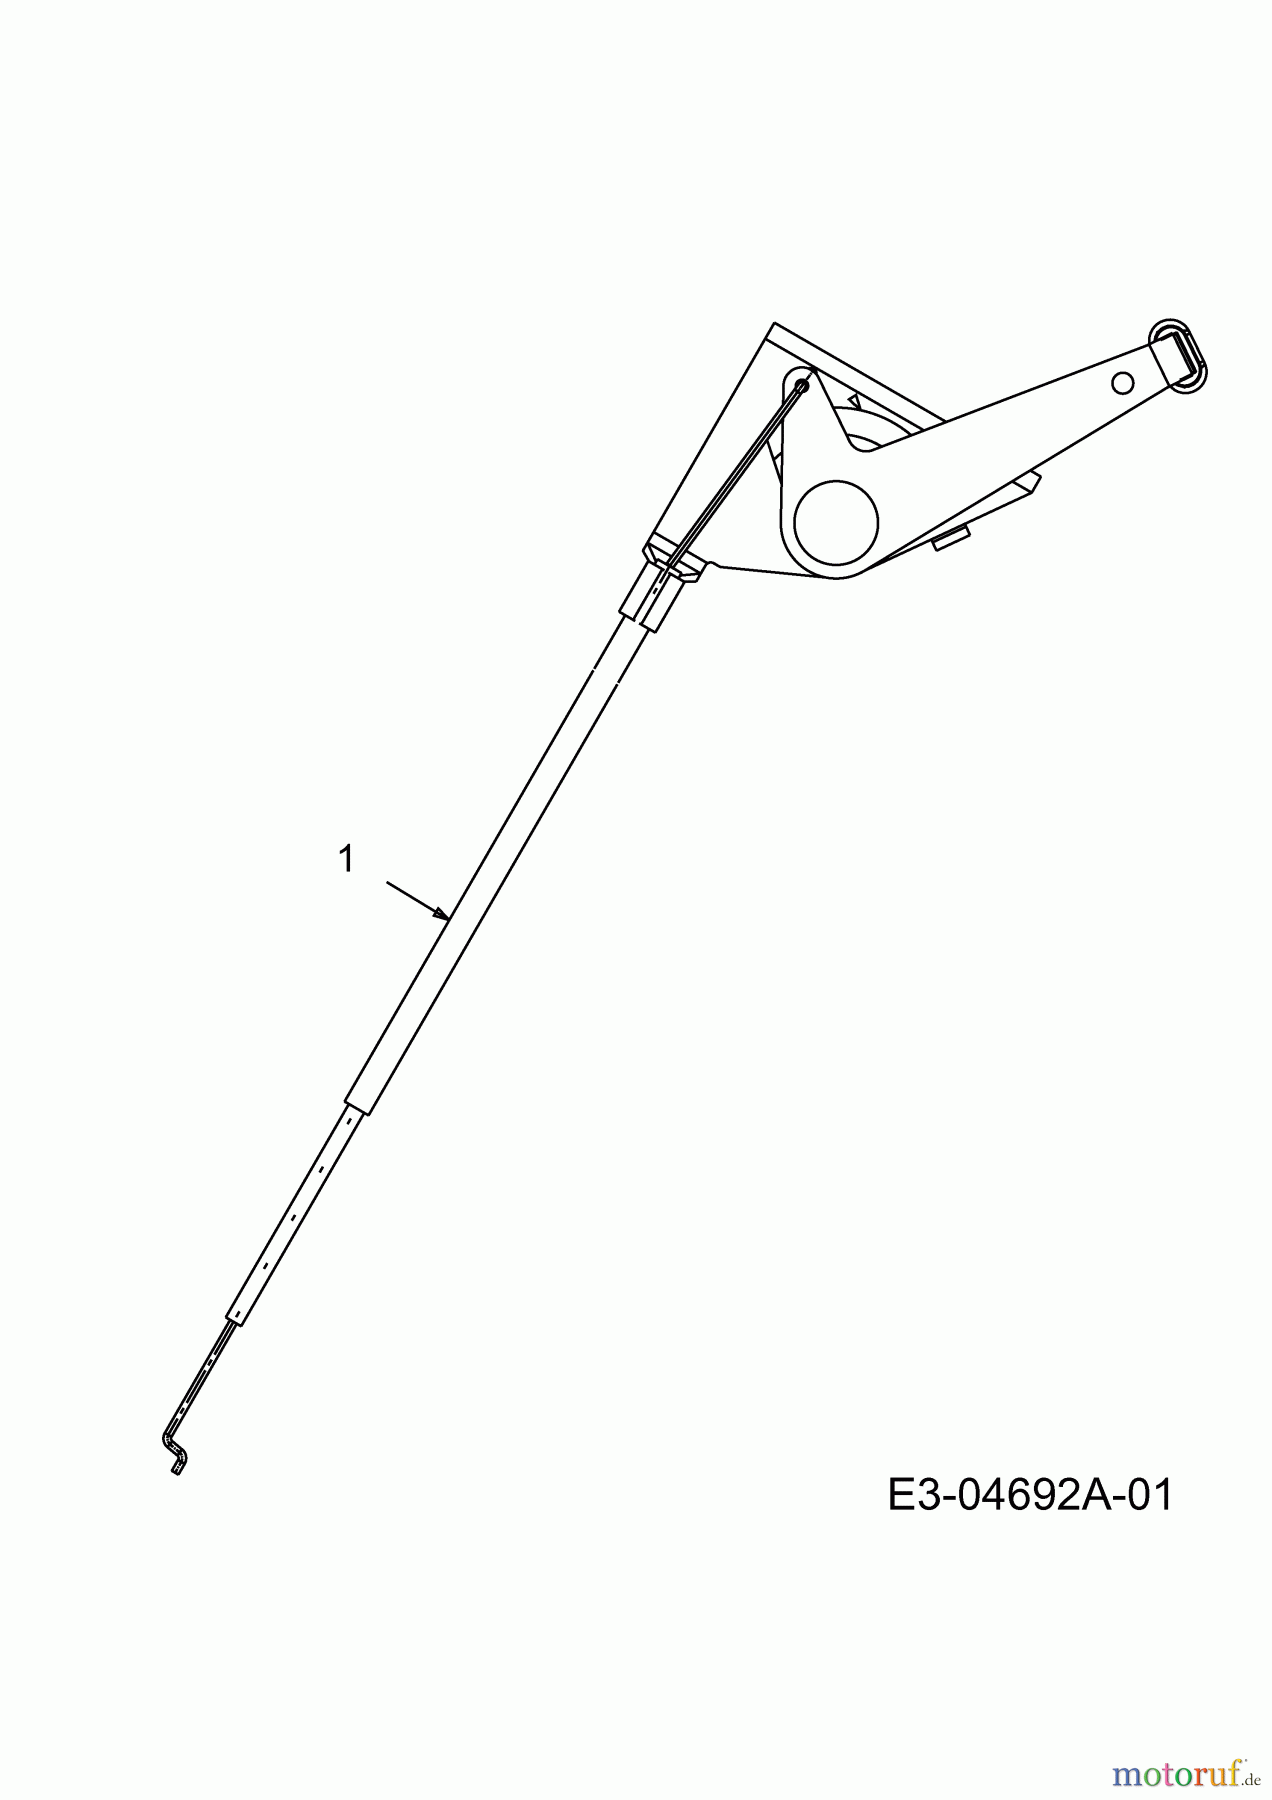  MTD Lawn tractors B 155 13AA688G678  (2003) Throttle cable